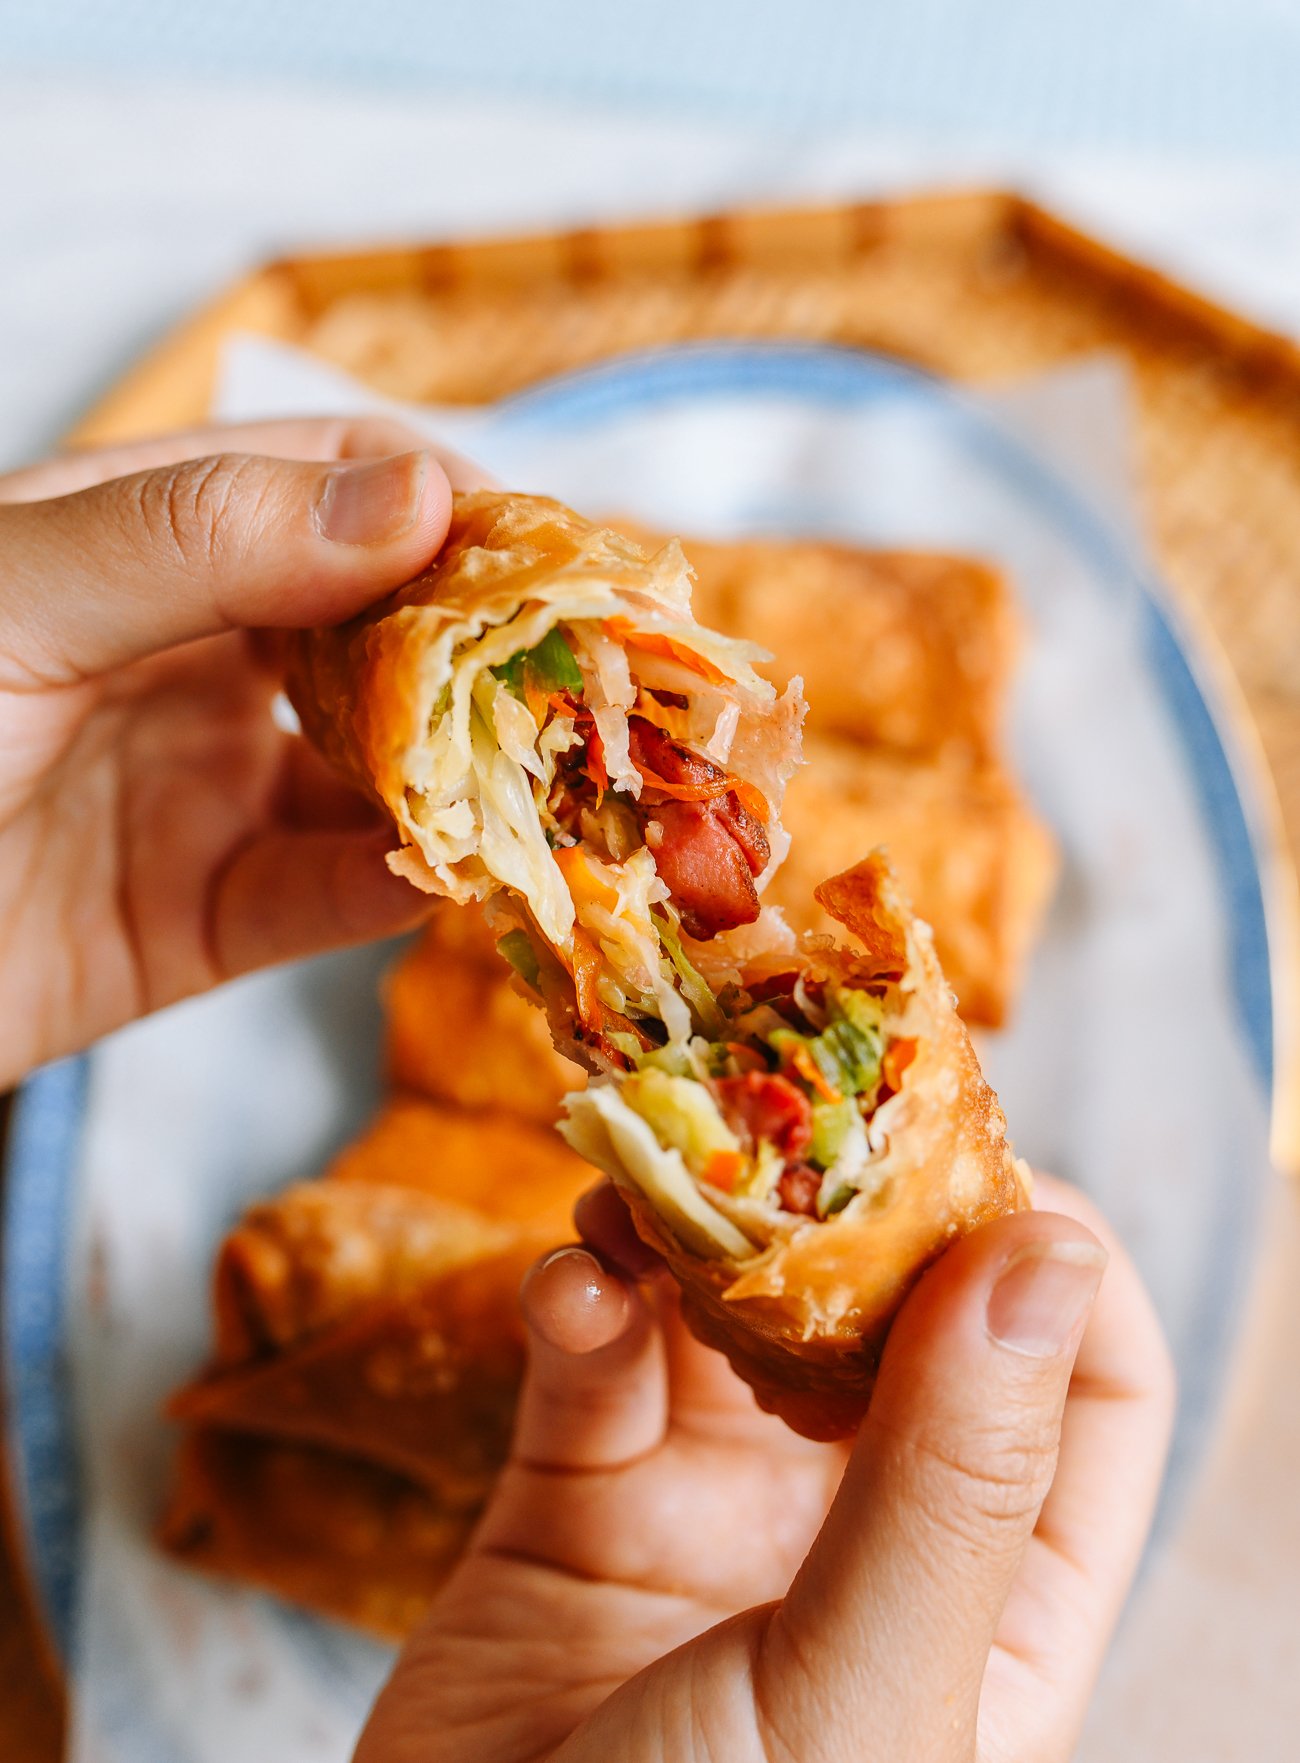 Delicious and Unique Egg Roll Recipes: Get Creative with Different Fillings